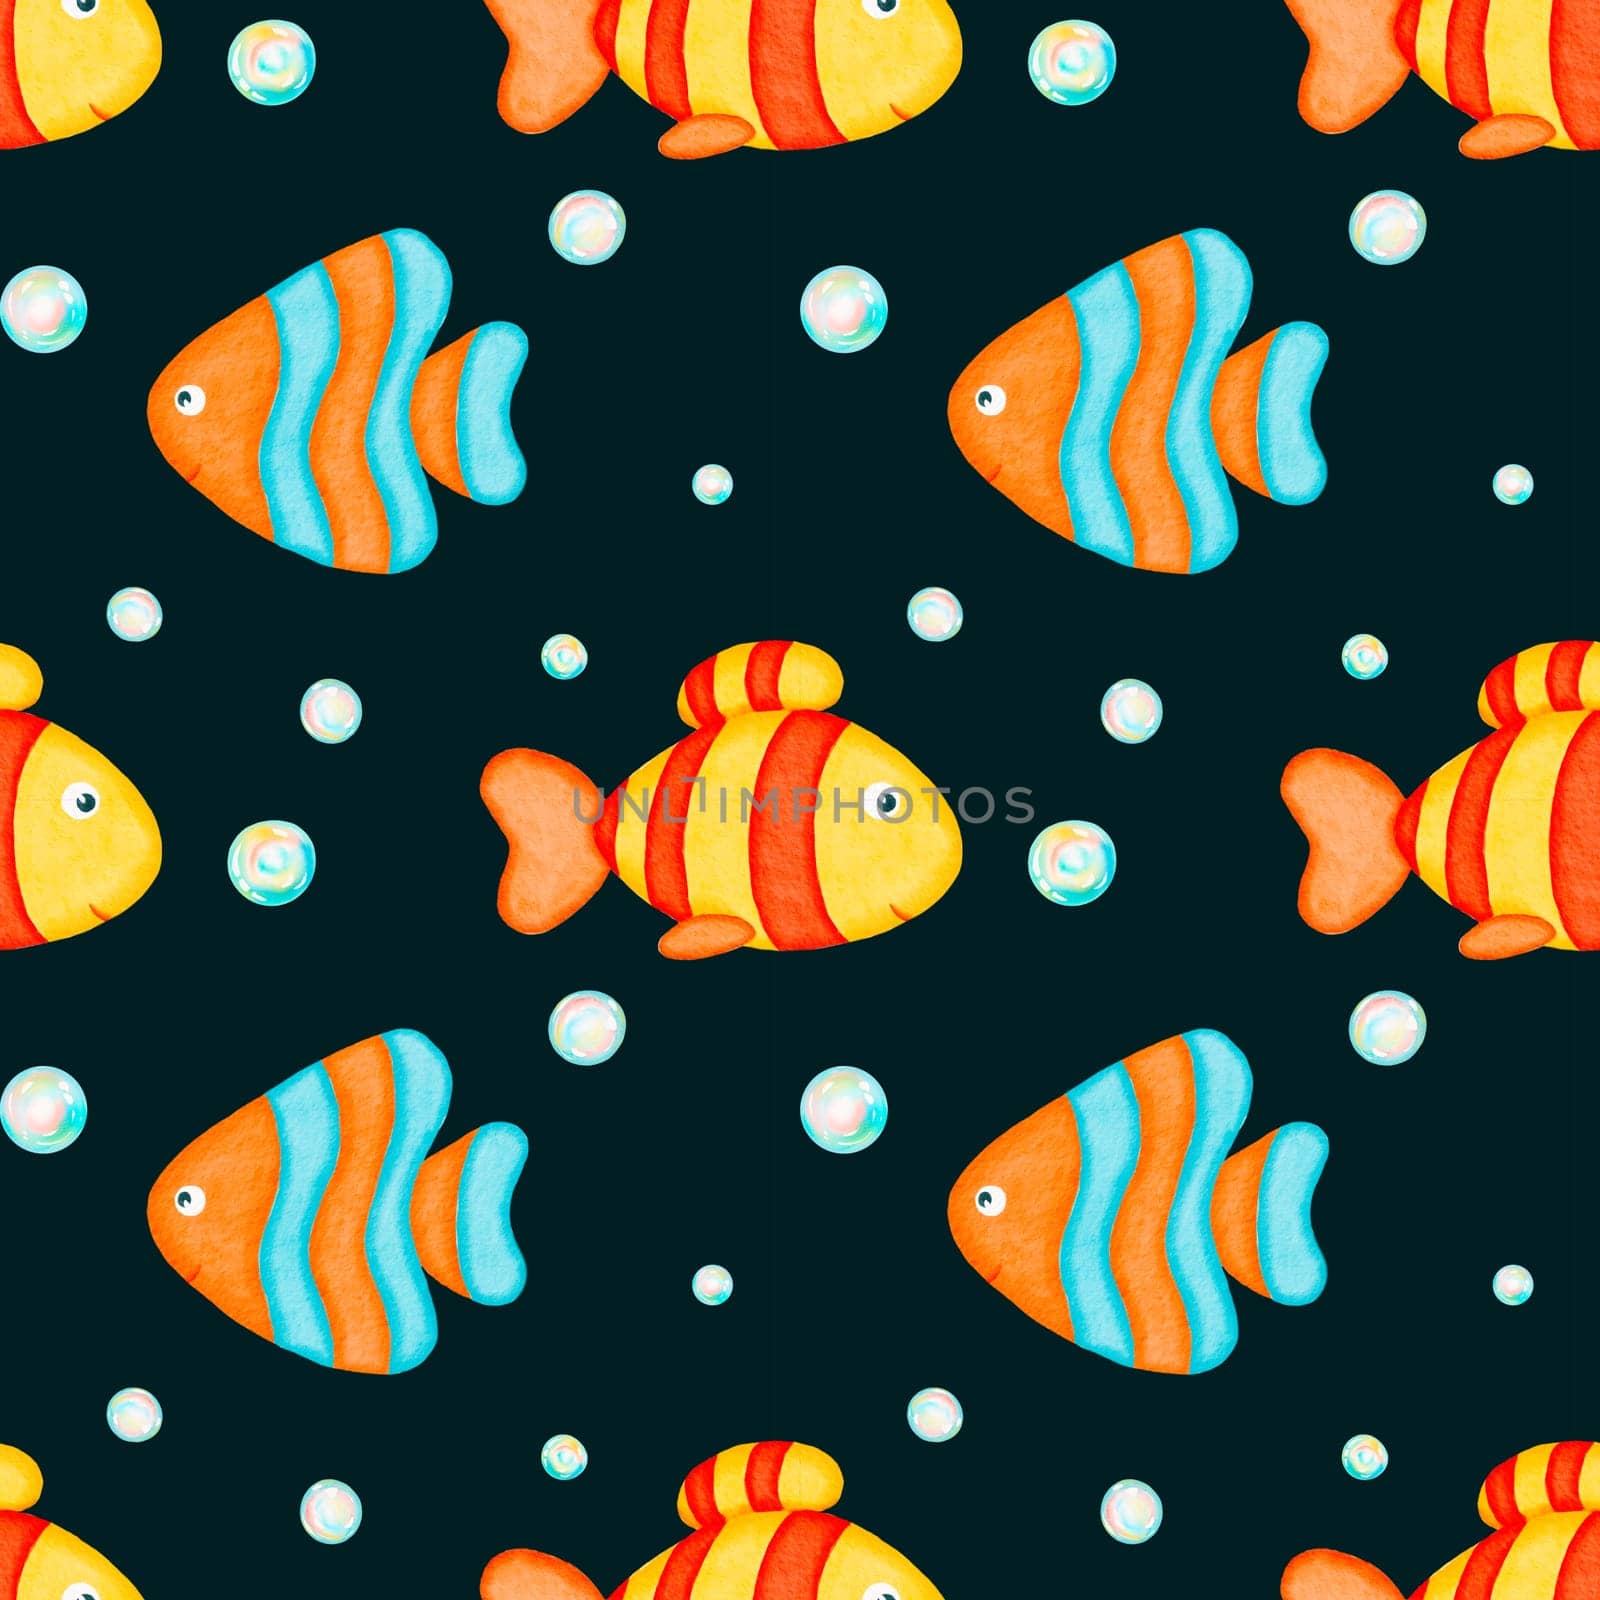 Watercolor seamless pattern. colorful fish and colorful soap bubbles pattern. Toys. Bath toys background. Design for kids, children, textile, fabric, home decor. Painted ornament. Dark background by Art_Mari_Ka